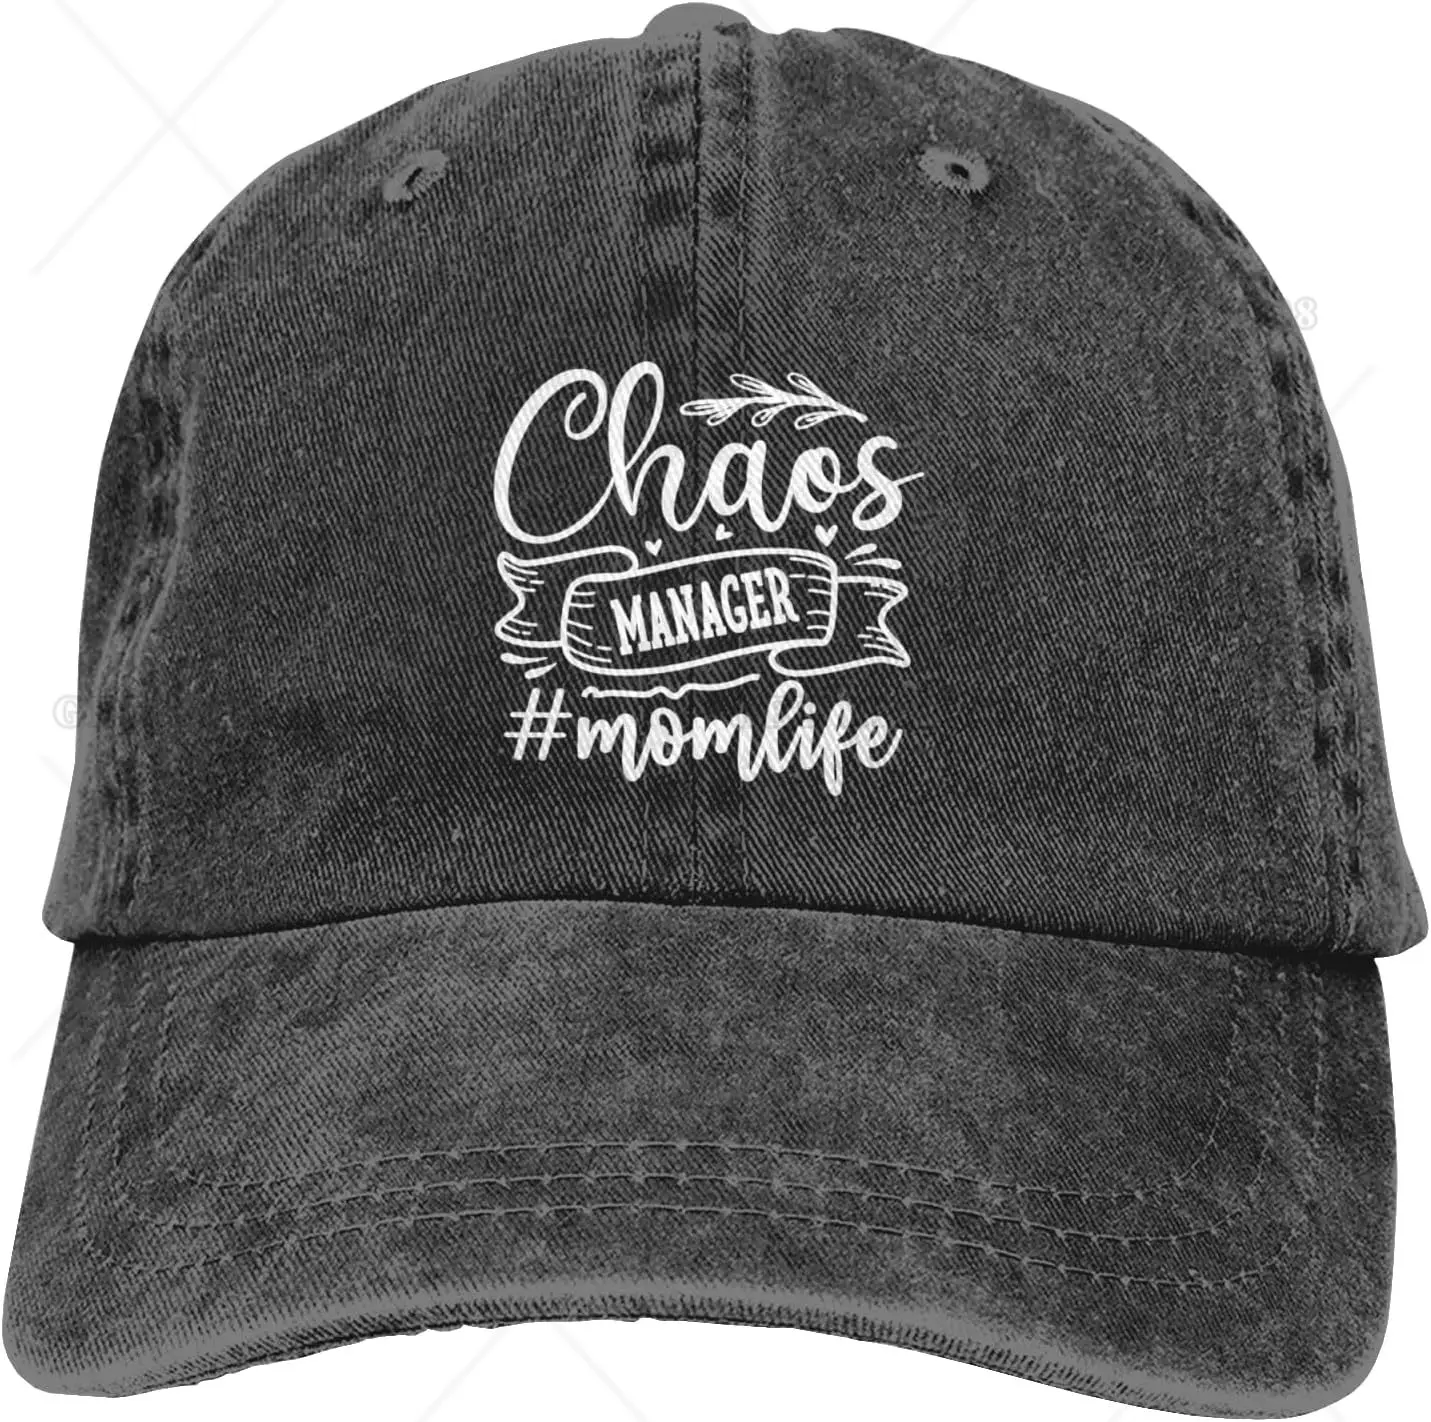 

Women's Chaos Mom Life Baseball Cap Adjustable Vintage Washed Hat for Dad and Mom One Size Designer Cap Women